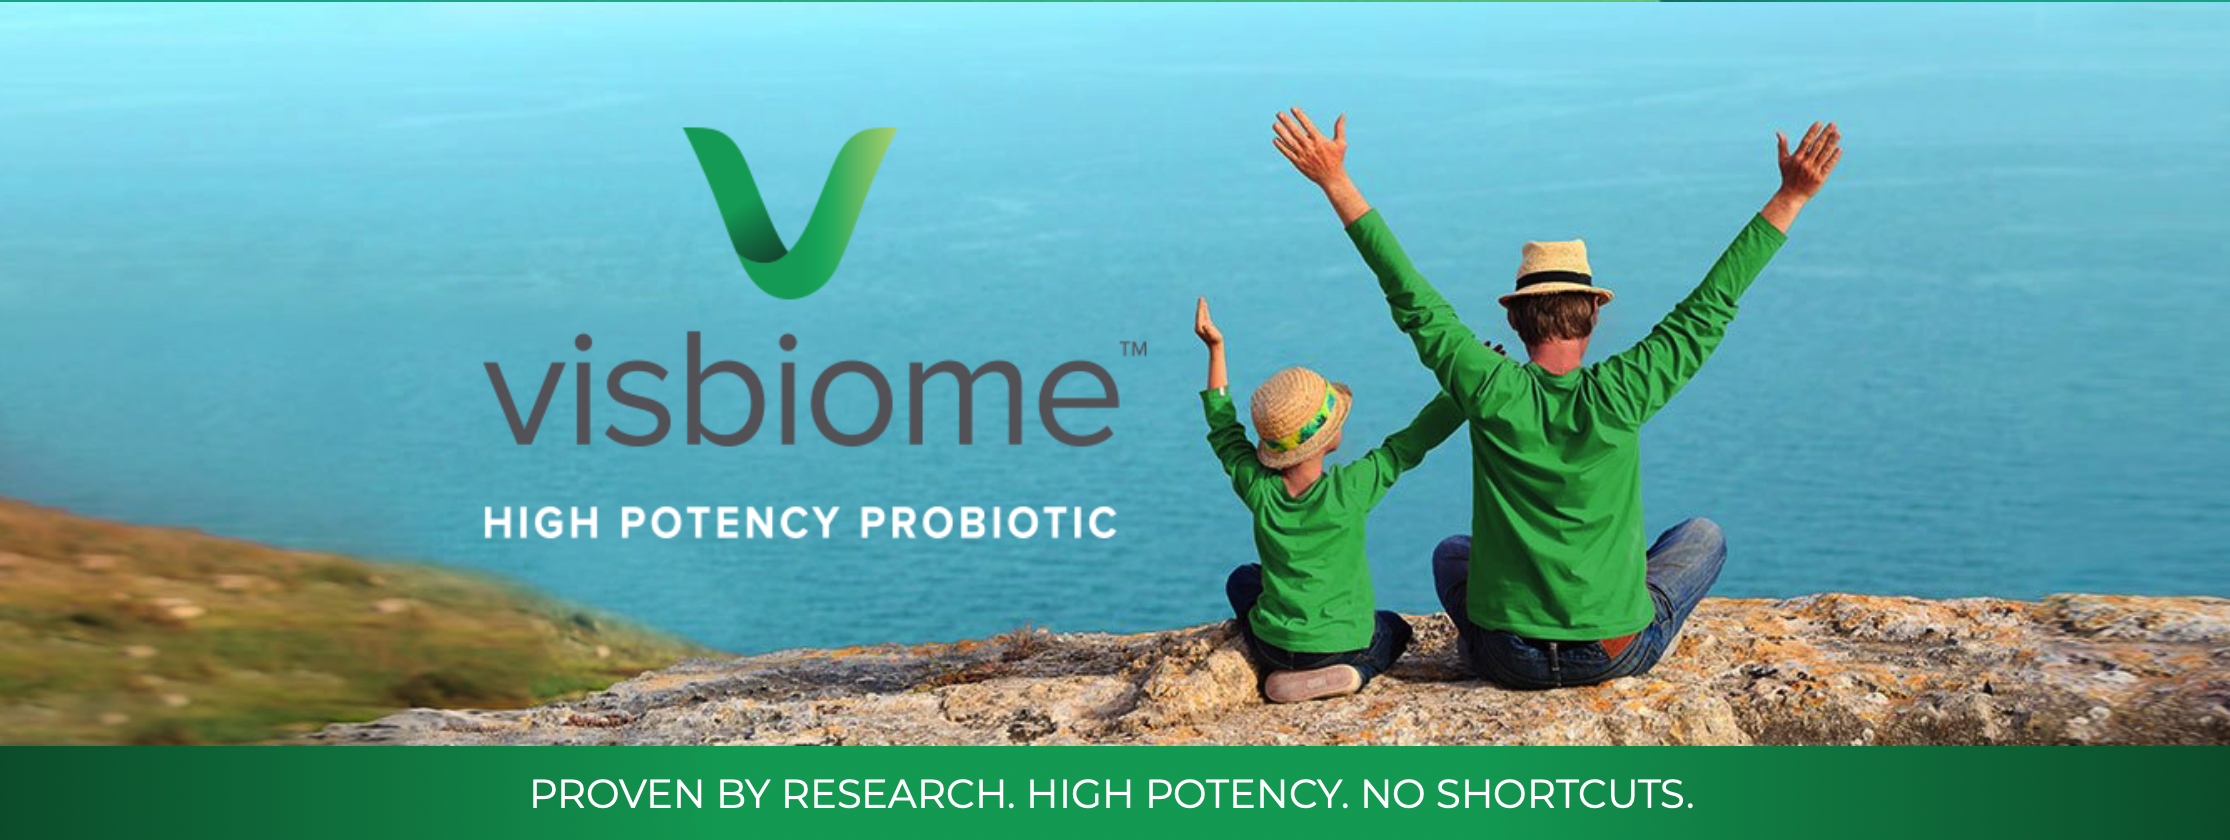 visbiome